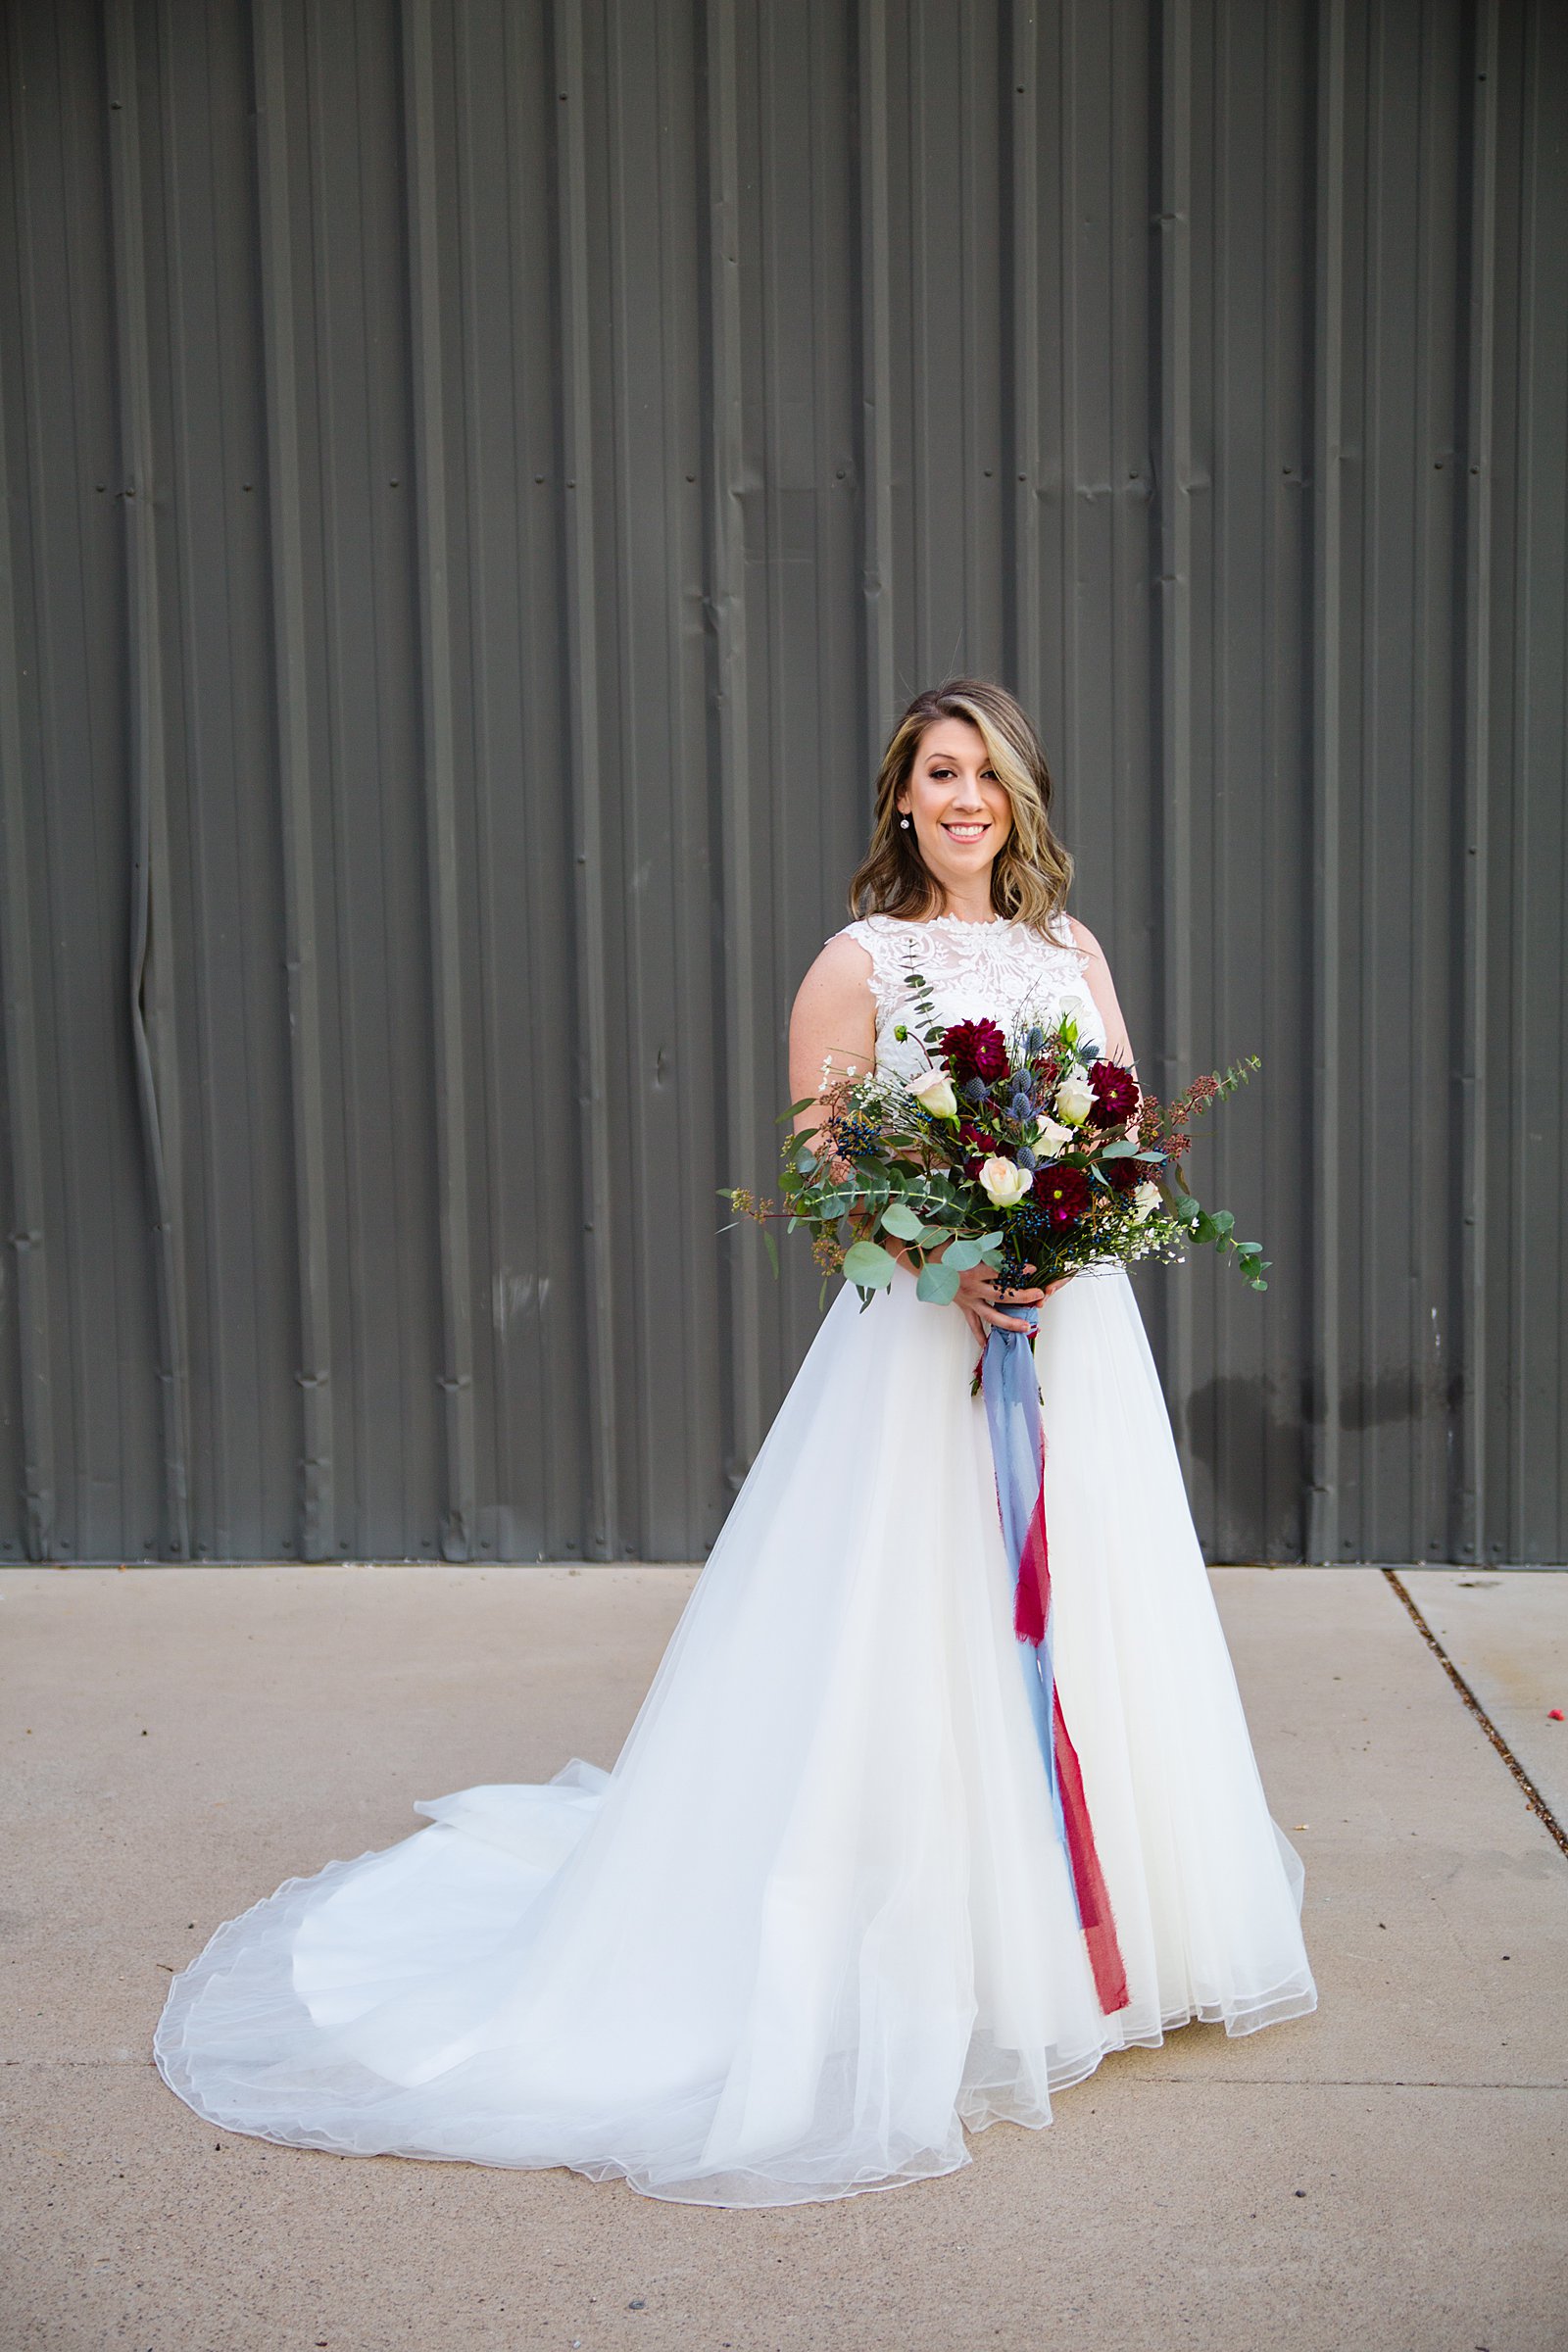 Bride with a simple and romantic wedding dress with a jewel toned bouquet by Phoenix wedding photographers PMA Photography.